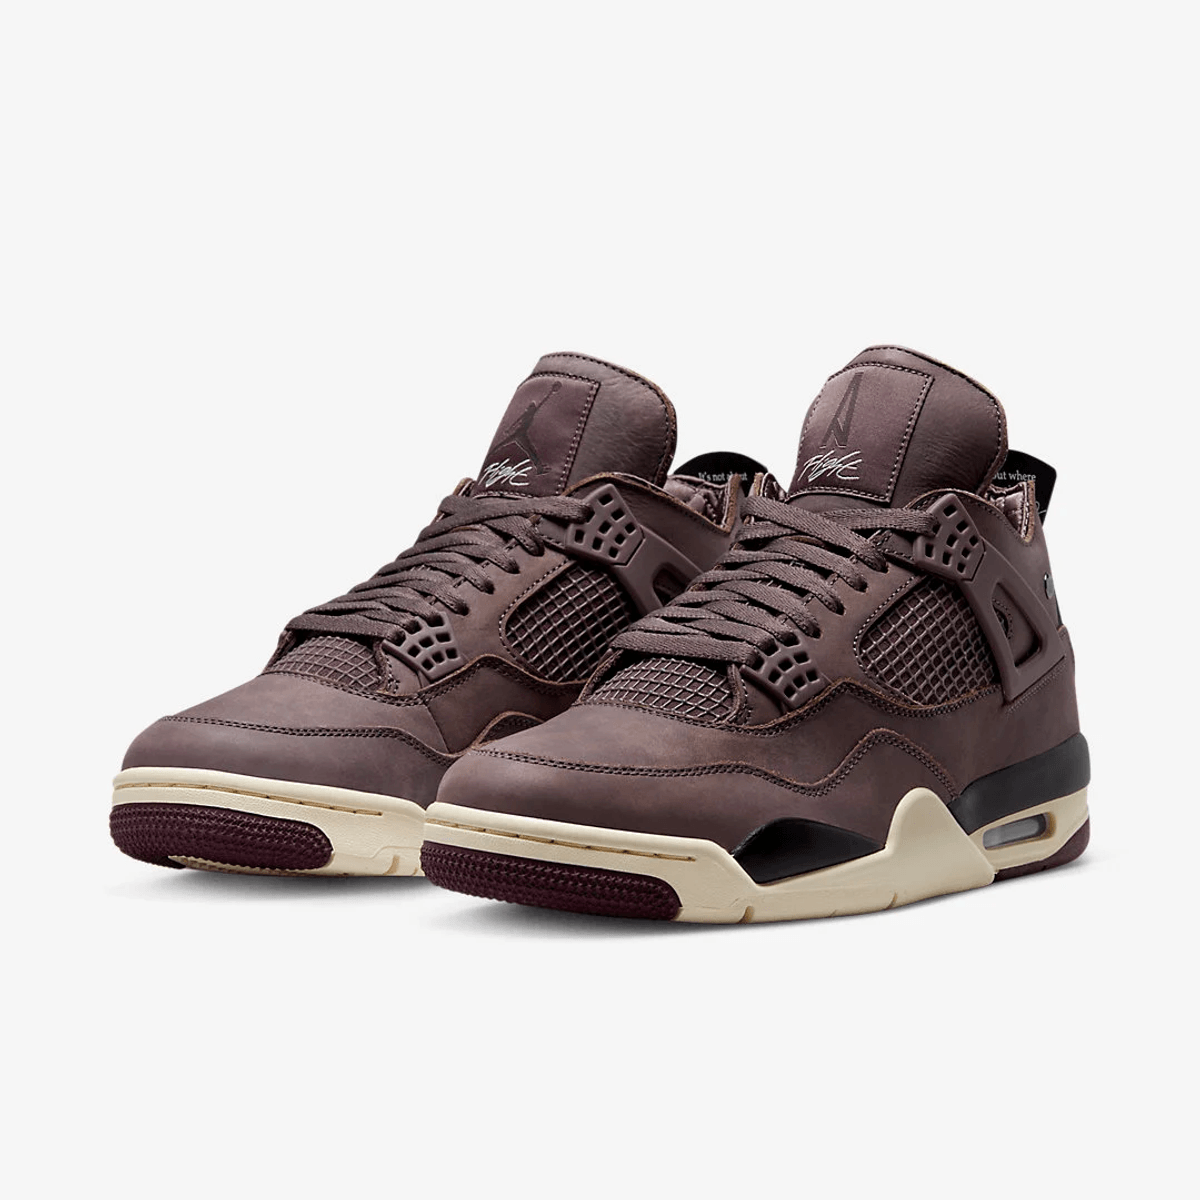 Official Images Of The Upcoming A Ma Maniére x Air Jordan 4